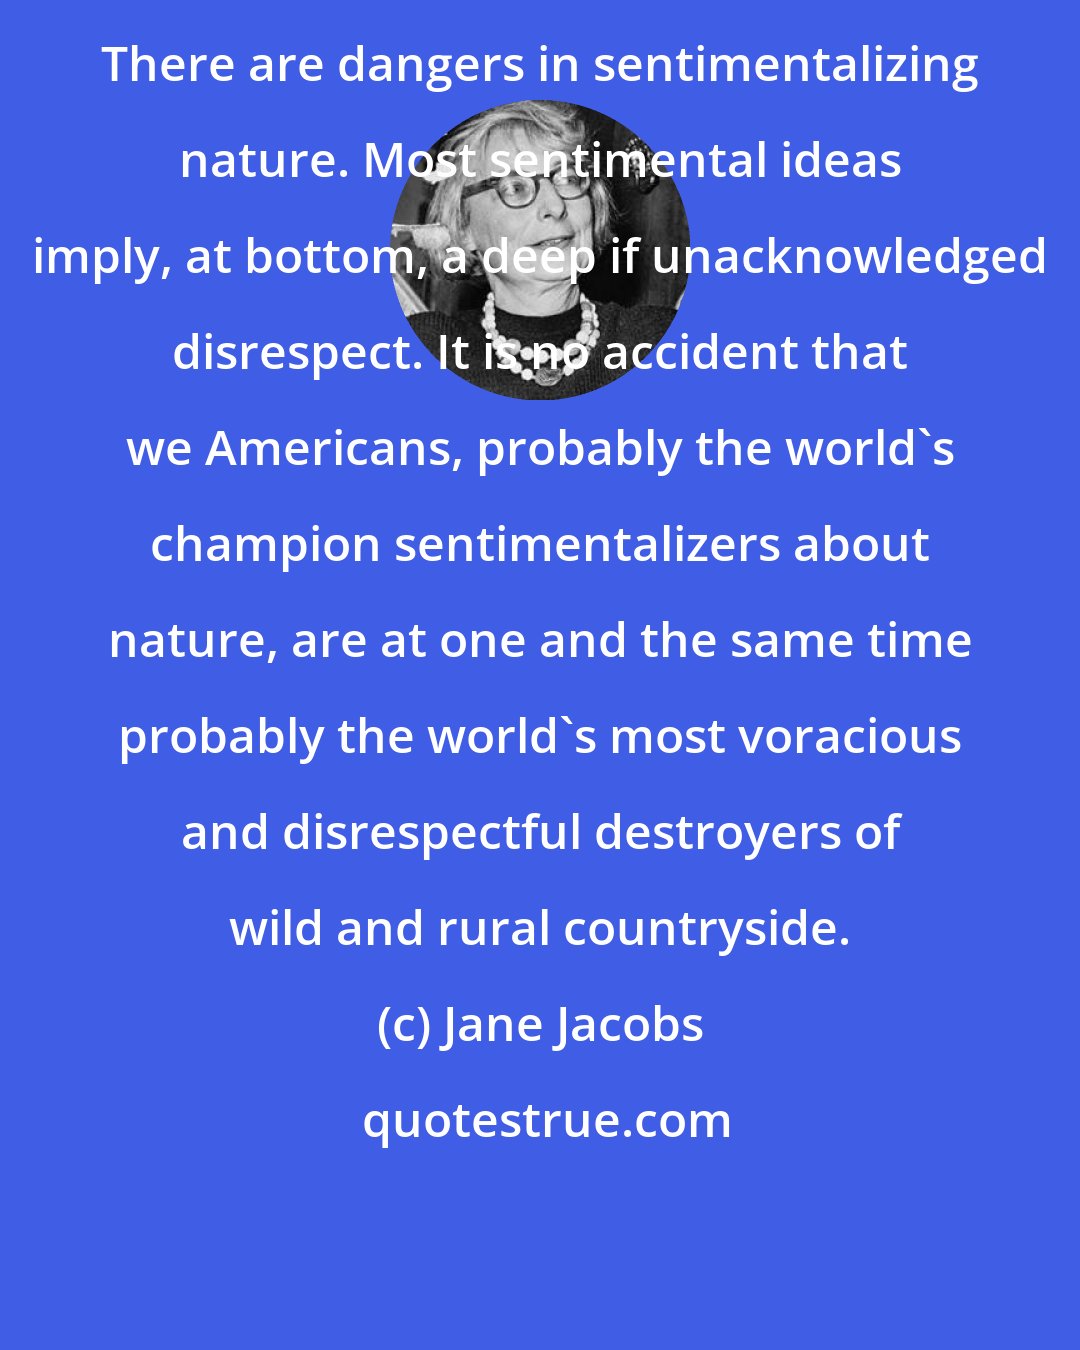 Jane Jacobs: There are dangers in sentimentalizing nature. Most sentimental ideas imply, at bottom, a deep if unacknowledged disrespect. It is no accident that we Americans, probably the world's champion sentimentalizers about nature, are at one and the same time probably the world's most voracious and disrespectful destroyers of wild and rural countryside.